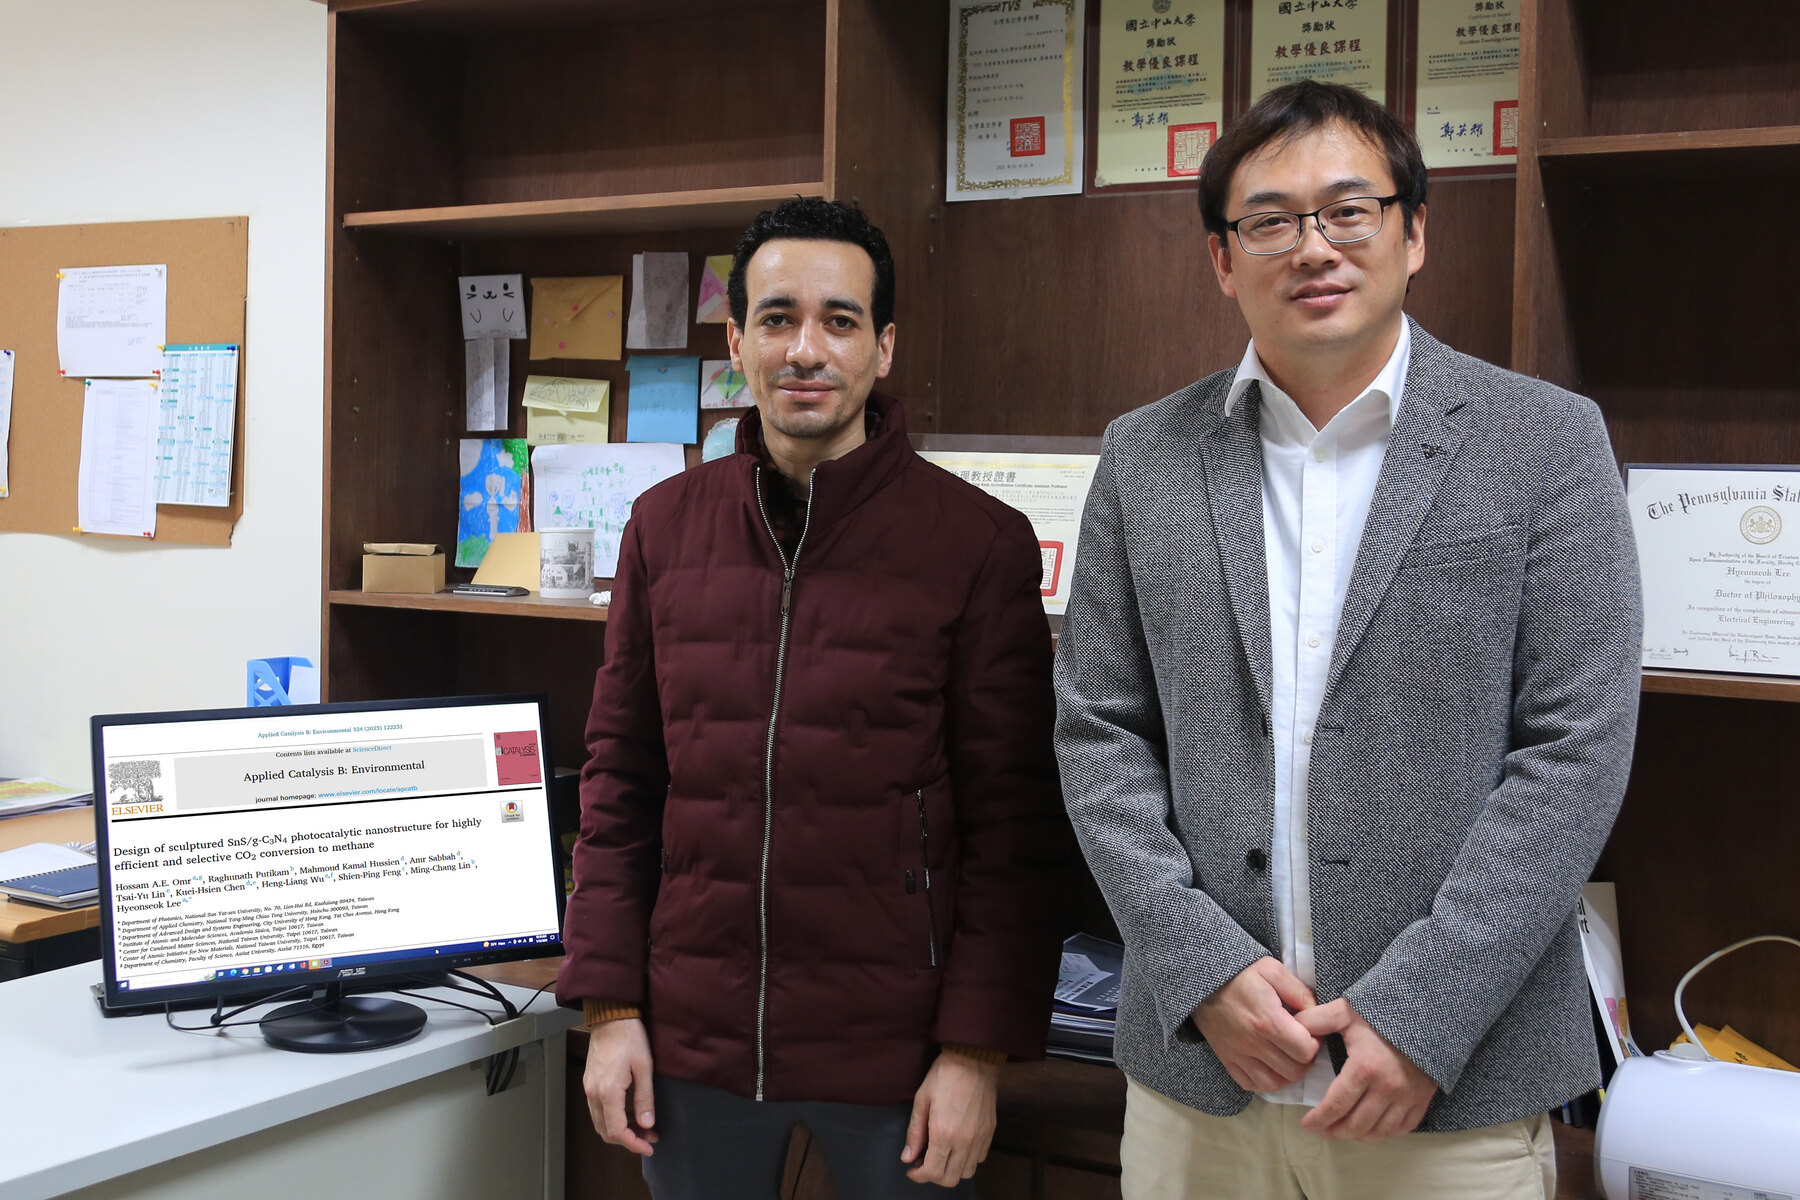 Professor Hyeonseok Lee (right) and doctoral student Hossam A. E. Omr (left)